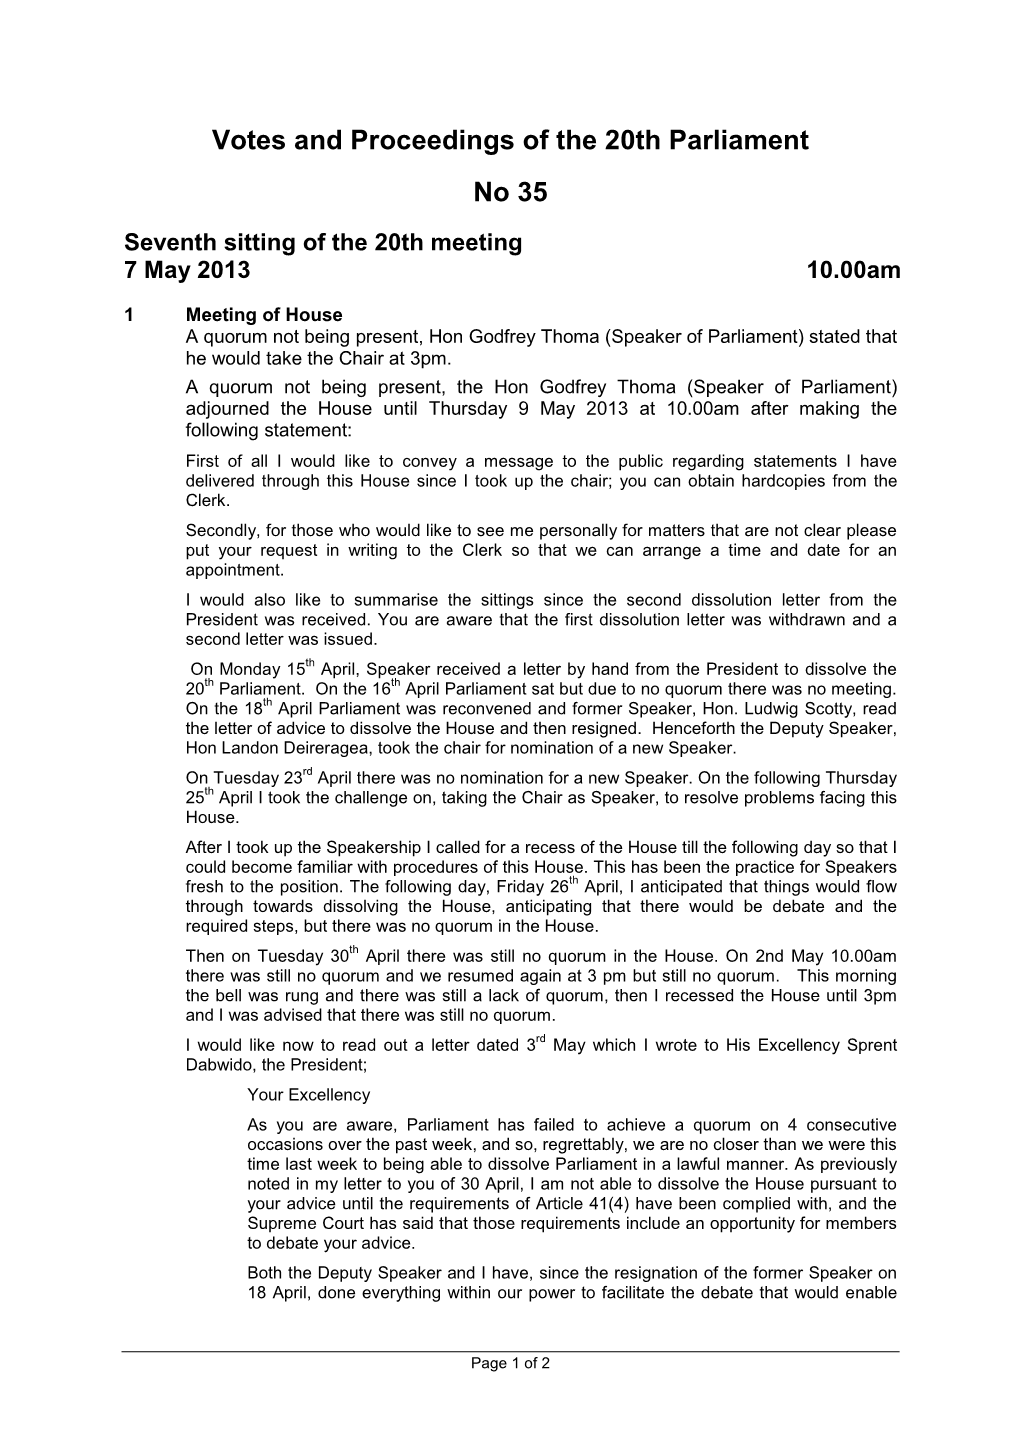 Votes and Proceedings of the 20Th Parliament No 35 Seventh Sitting of the 20Th Meeting 7 May 2013 10.00Am